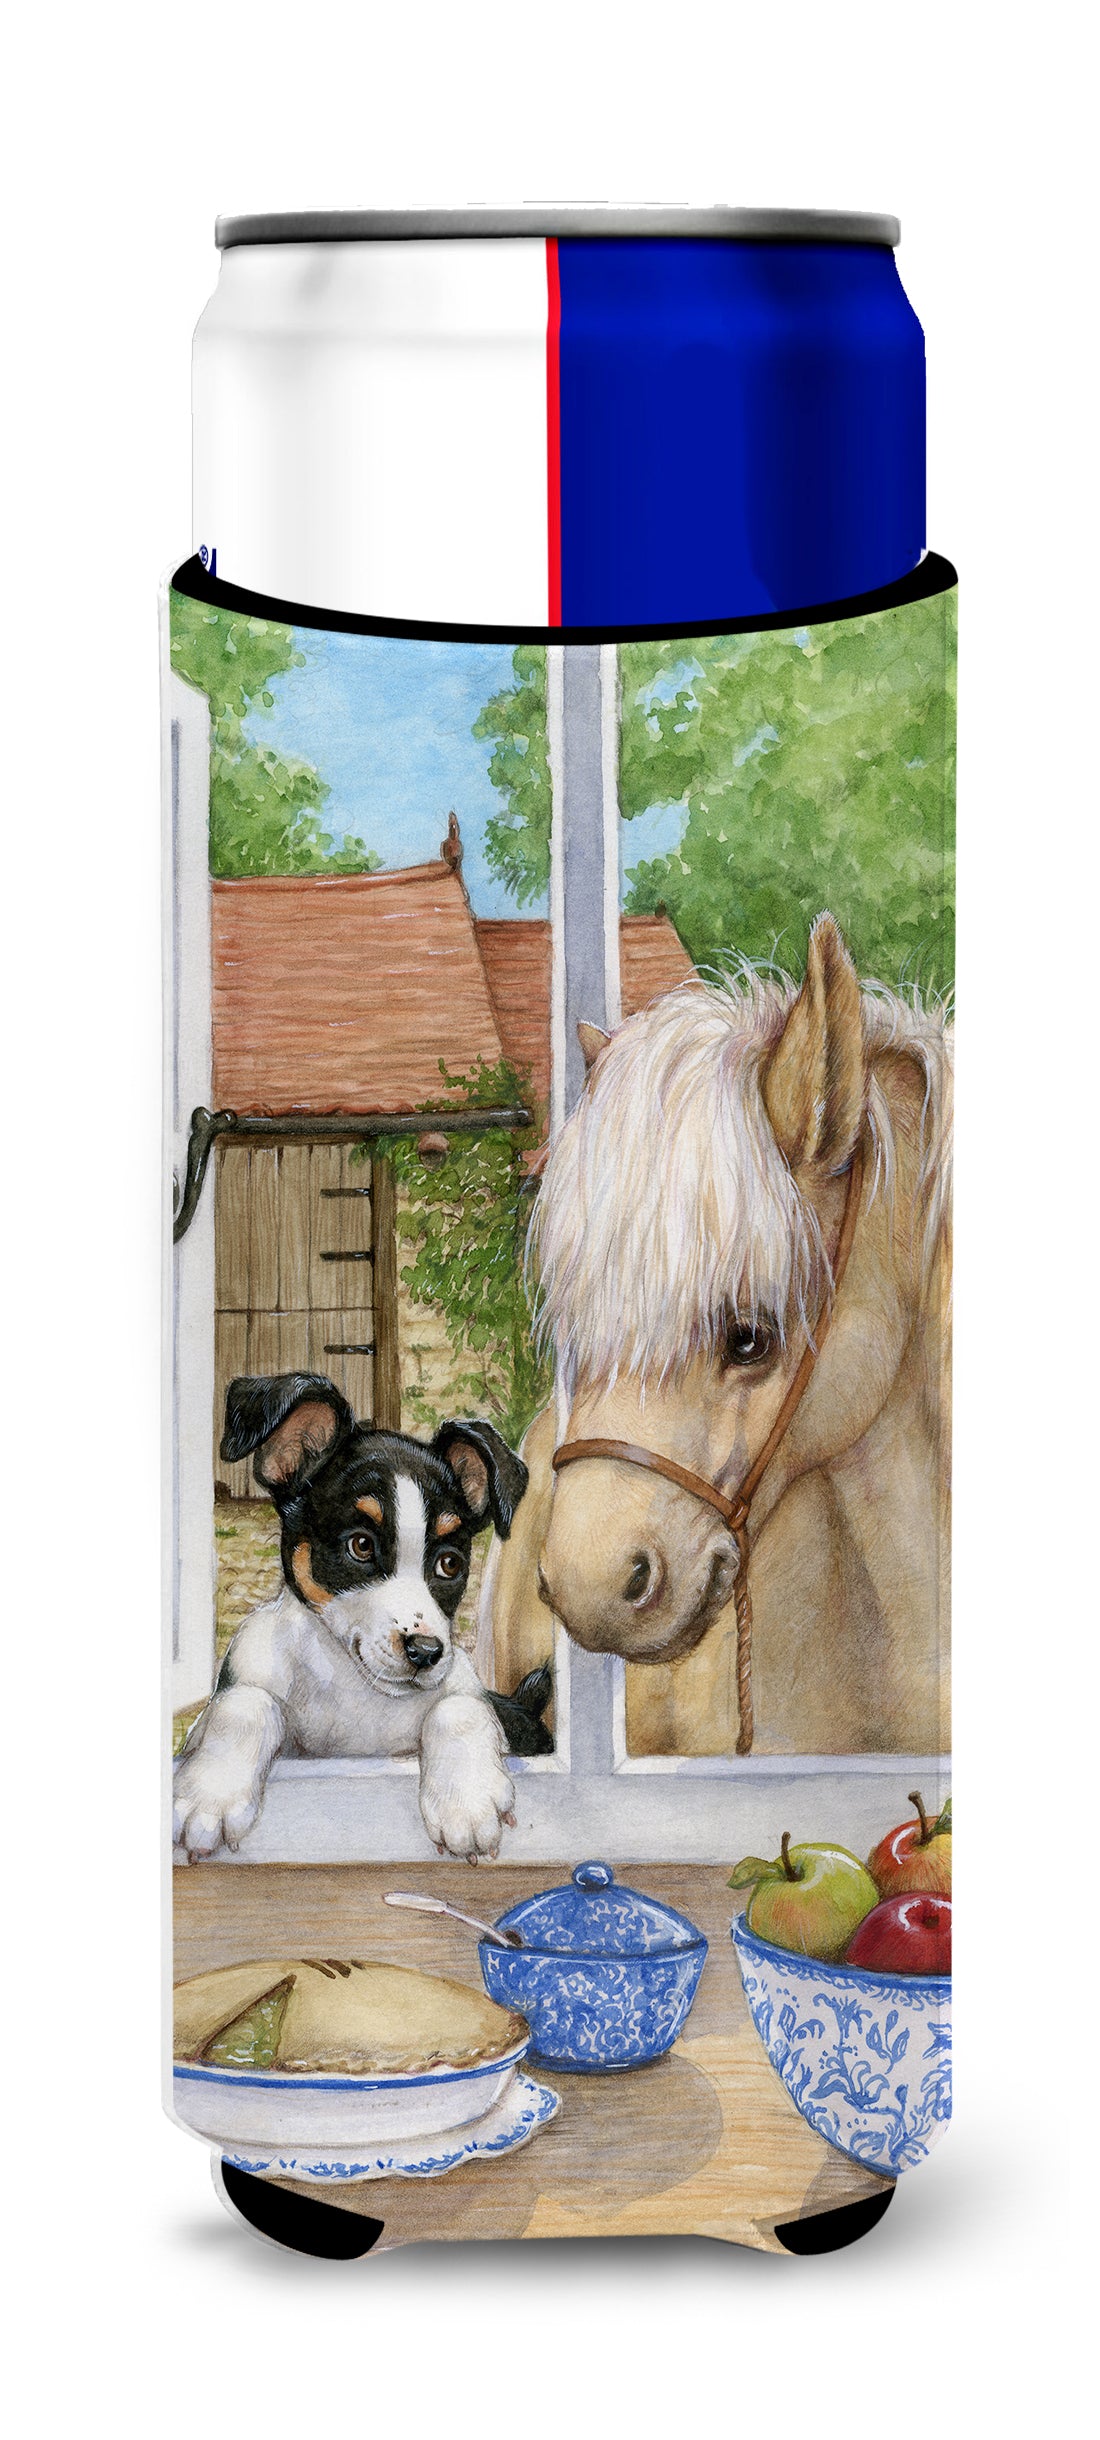 Jack Russel Puppy and Foal Horse Ultra Beverage Insulators for slim cans CDCO0379MUK